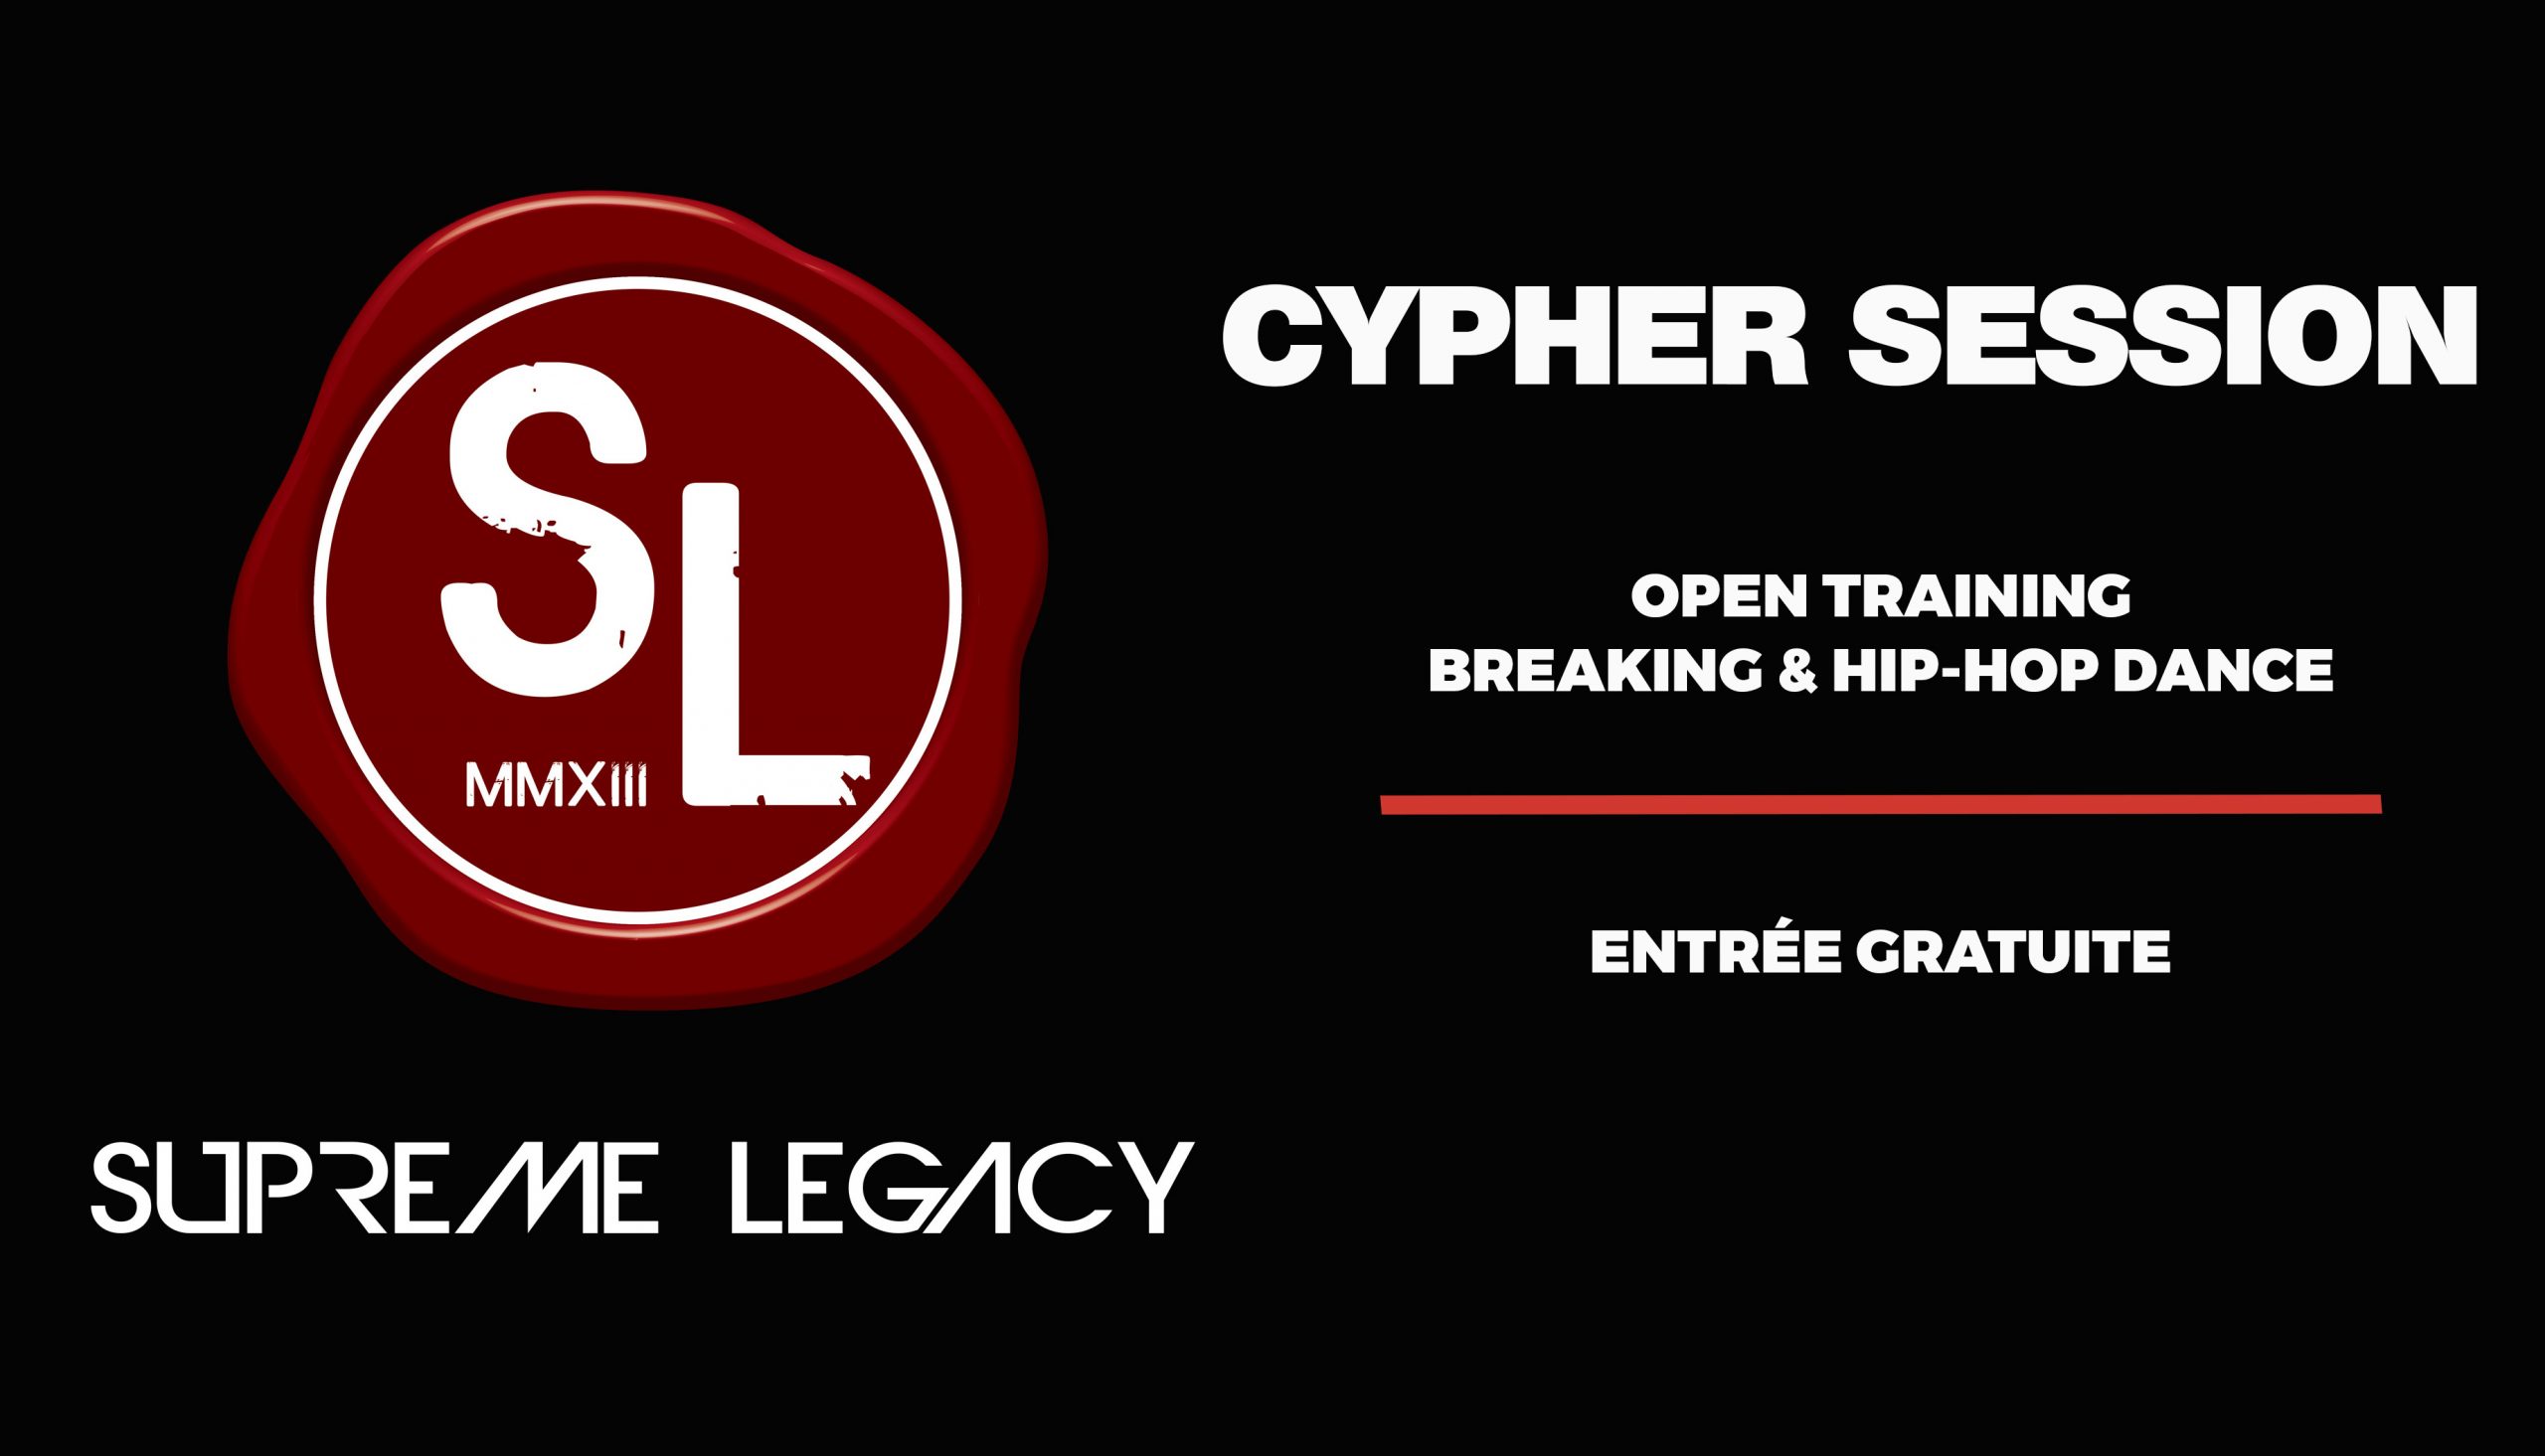 Cypher Session